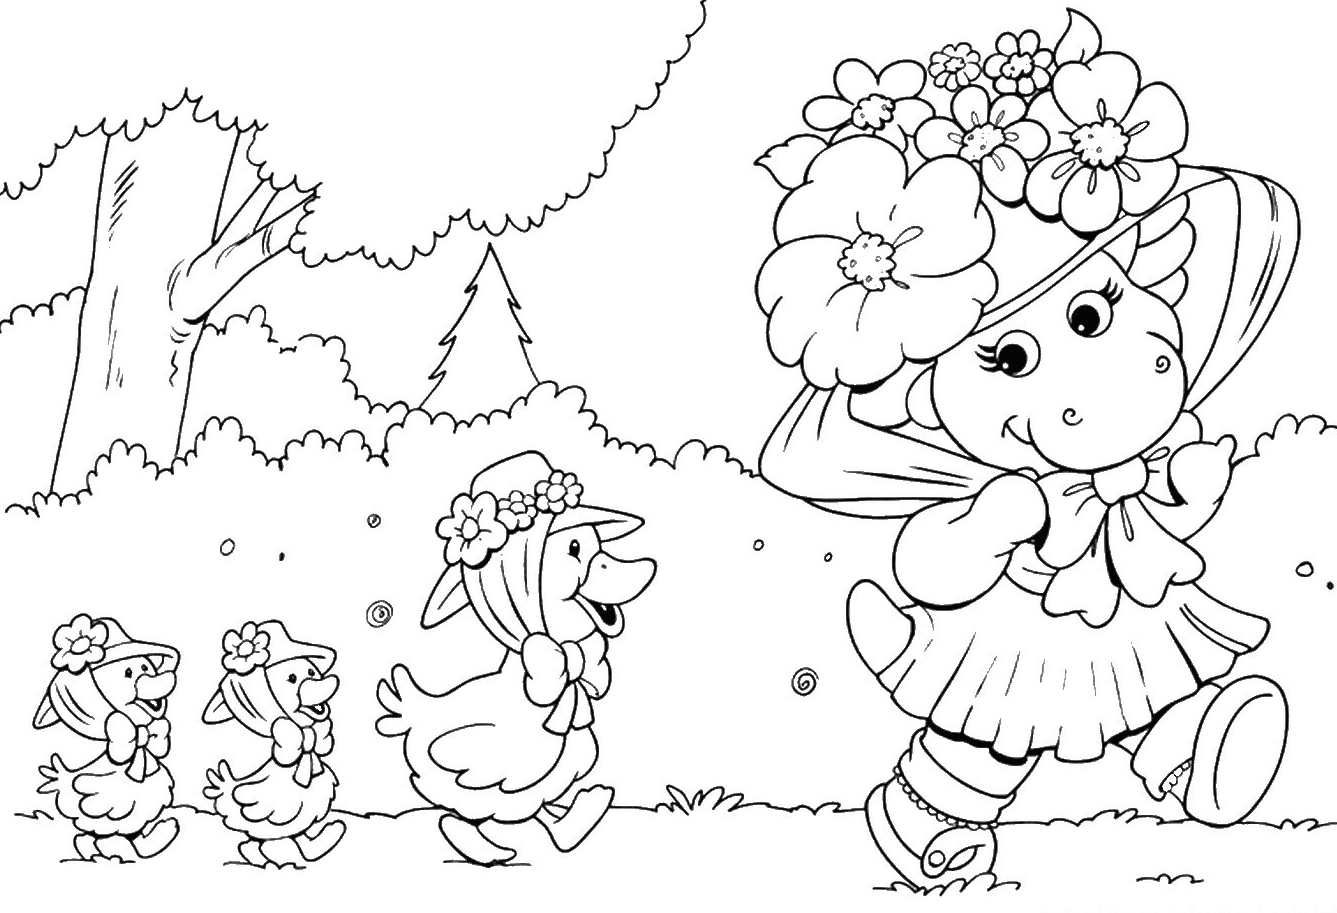 Baby Pop and Ducks Coloring Page